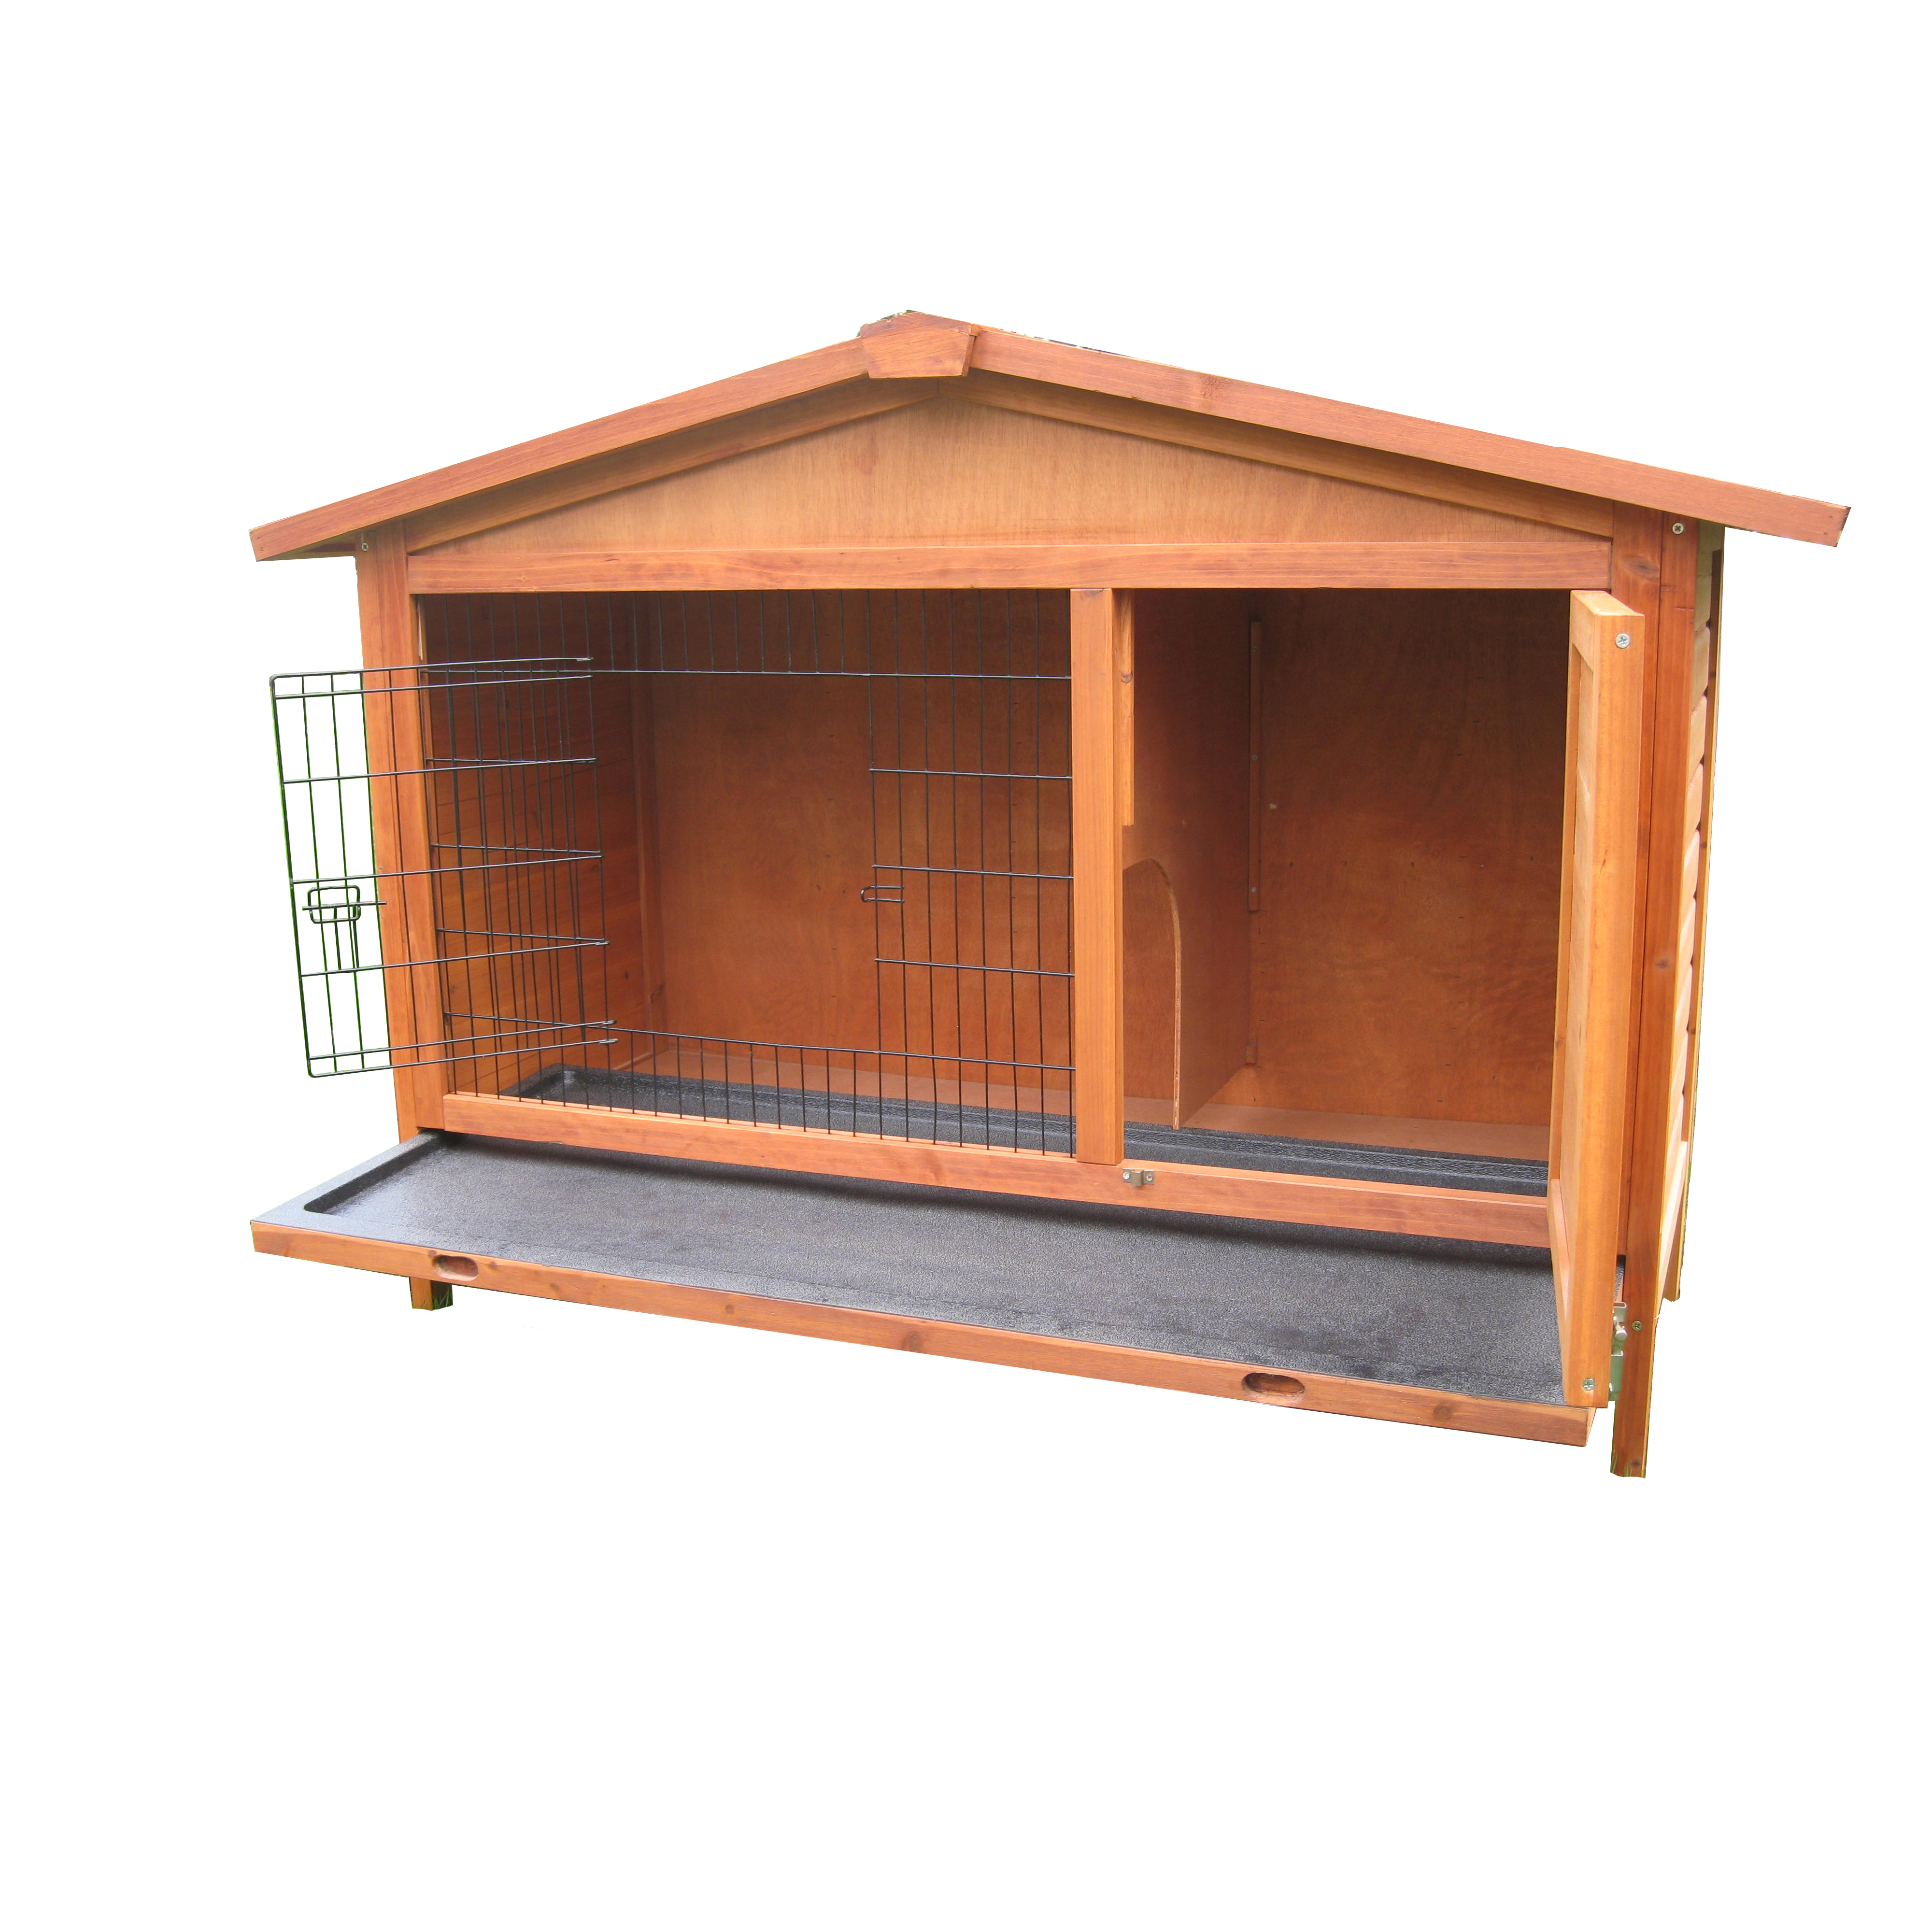 China OEM Wooden Bird House -
 fir wood easy assembled eco friendly outdoor Wooden Metal Floor Wood Rabbit Cage bunny house Sale – Easy